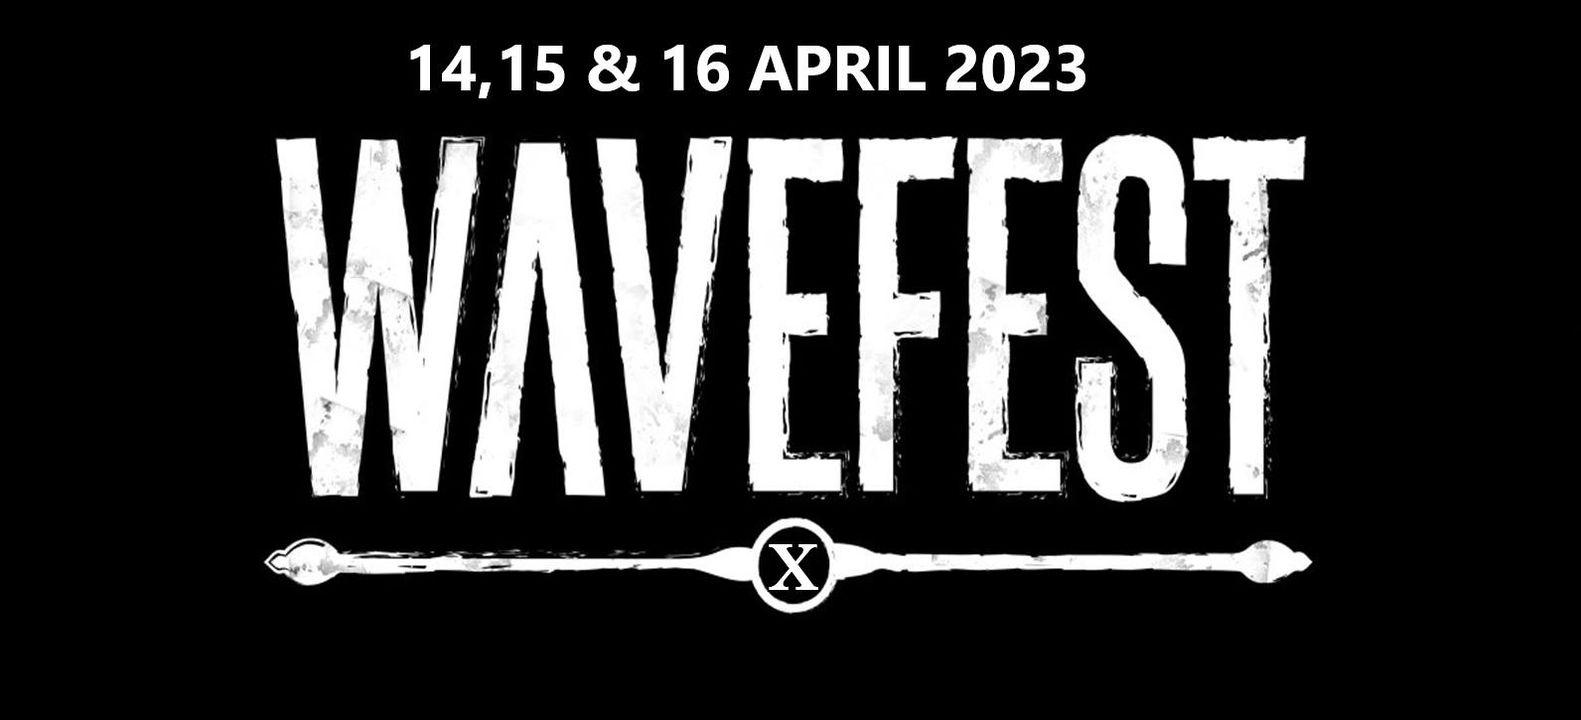 WAVEFEST X Whispering Sons + She Past Away + more! Baroeg